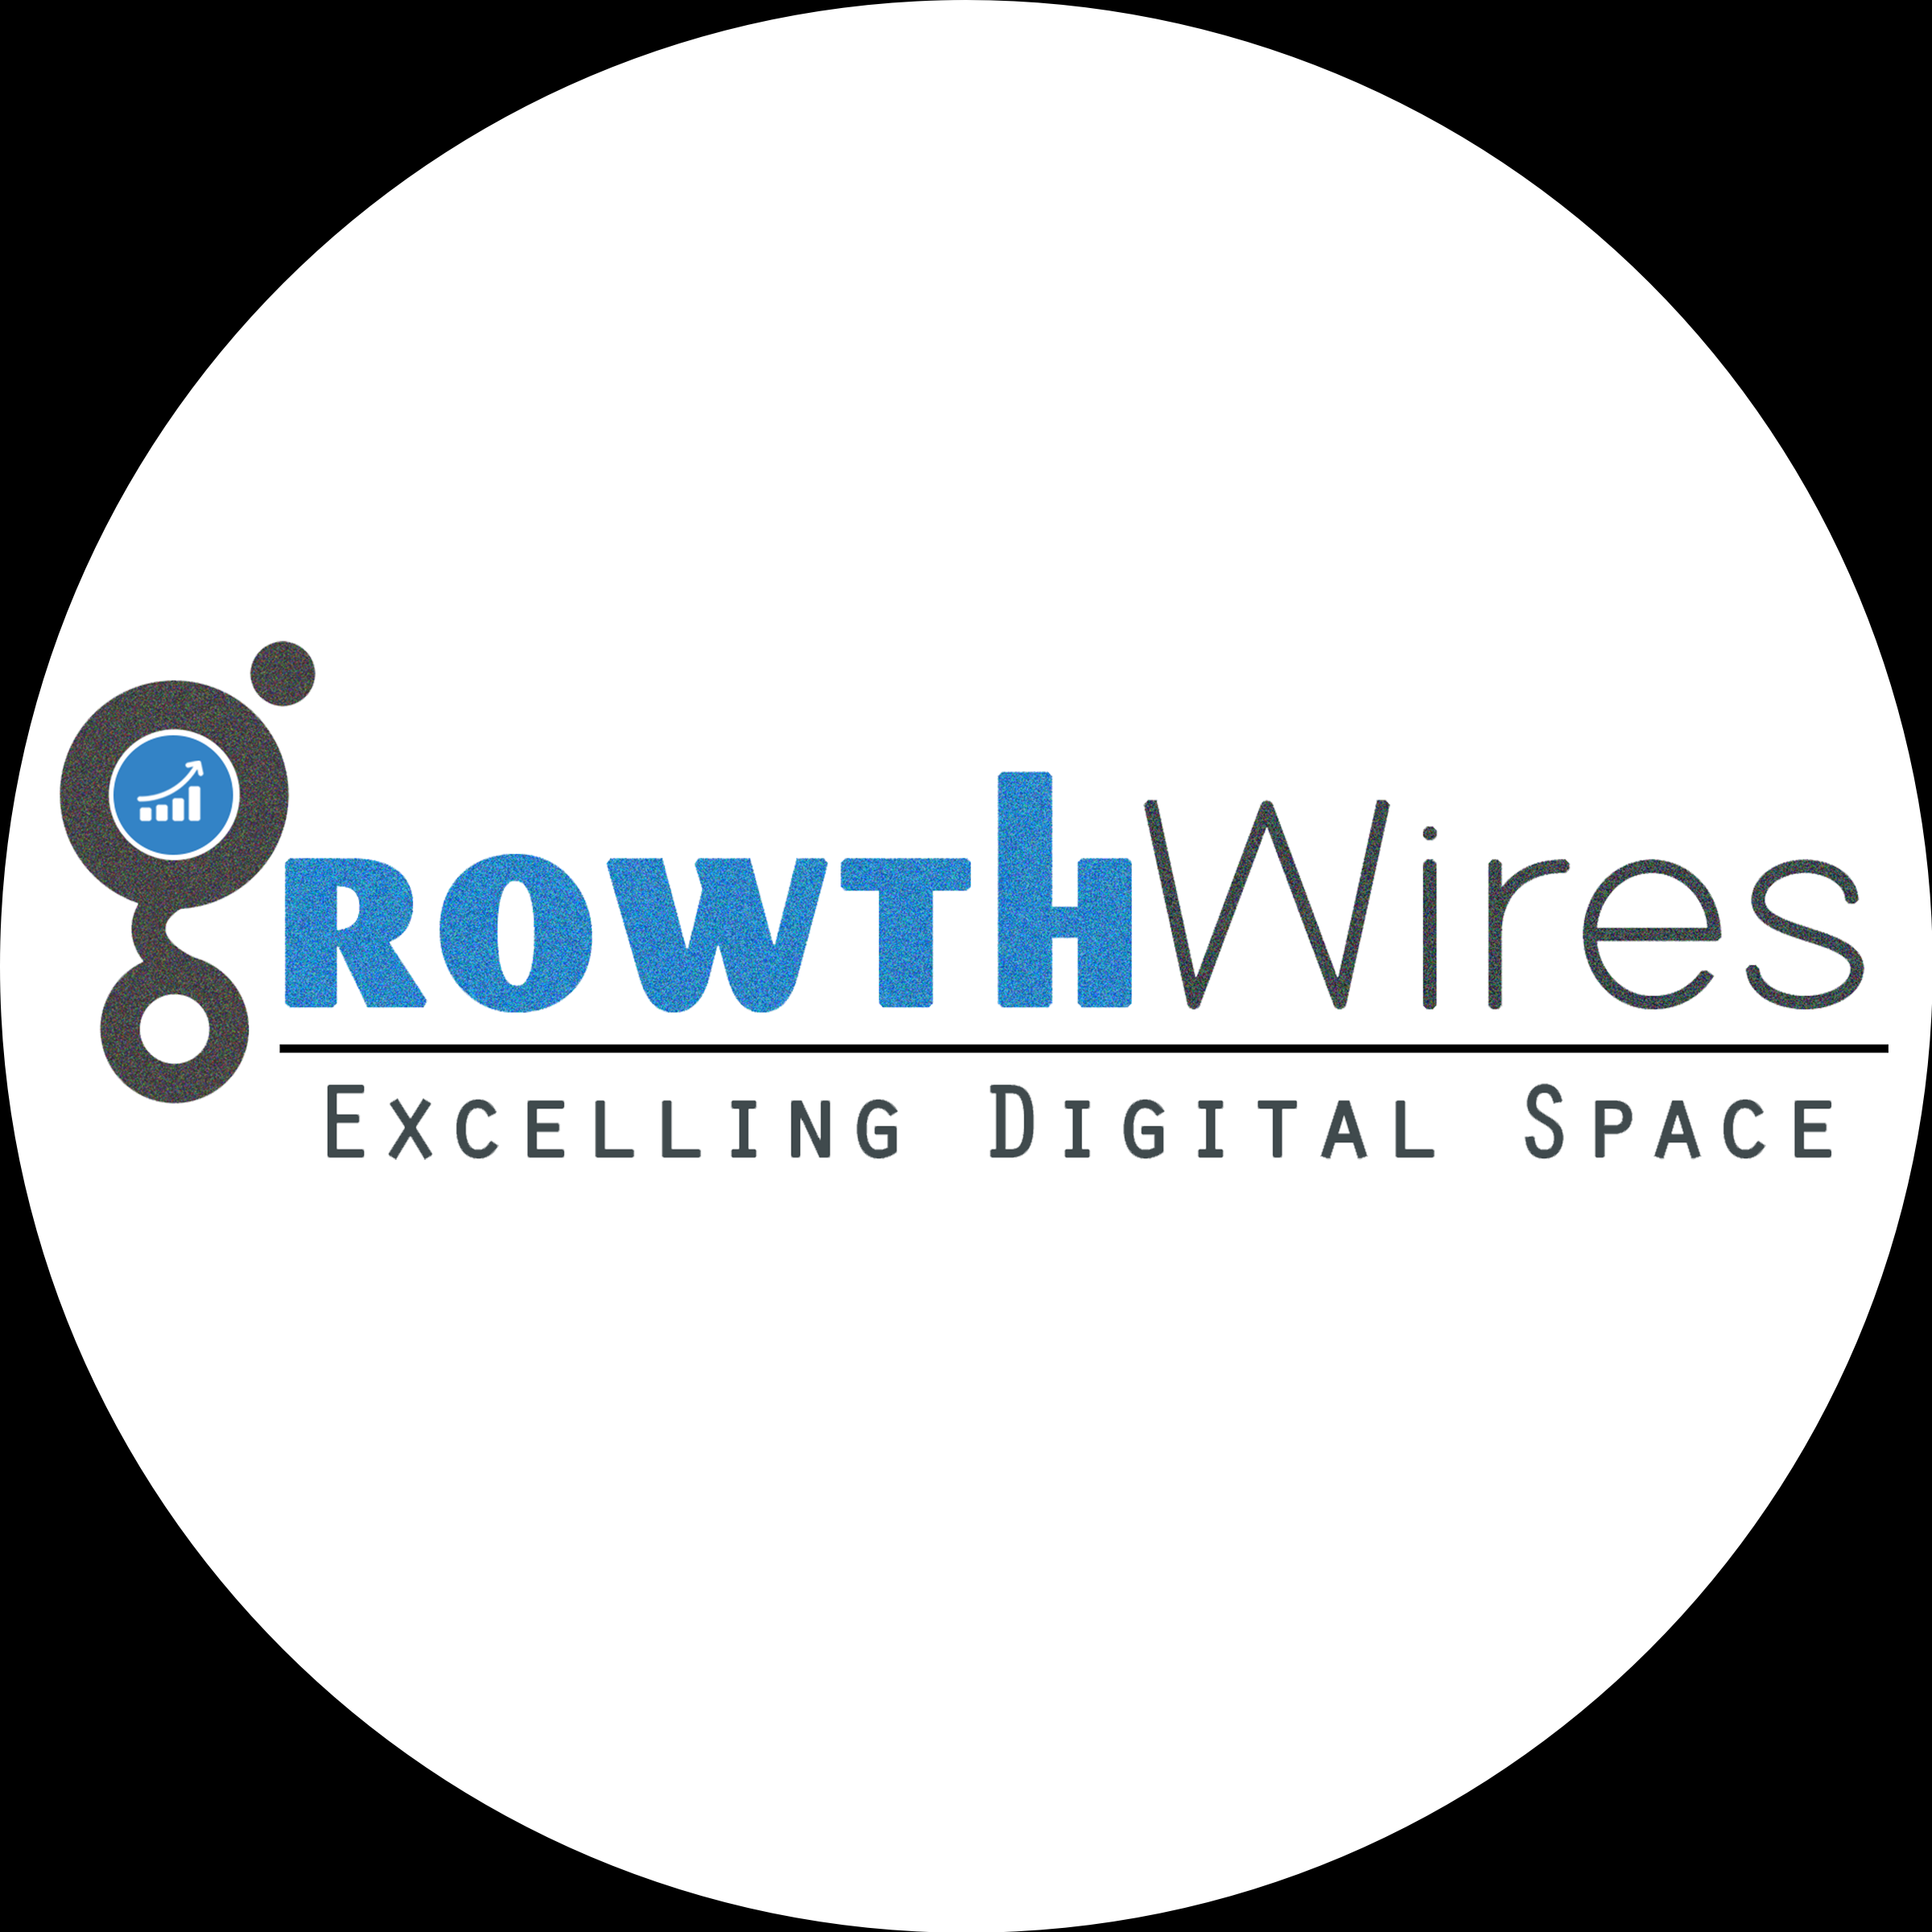 Growth Wires